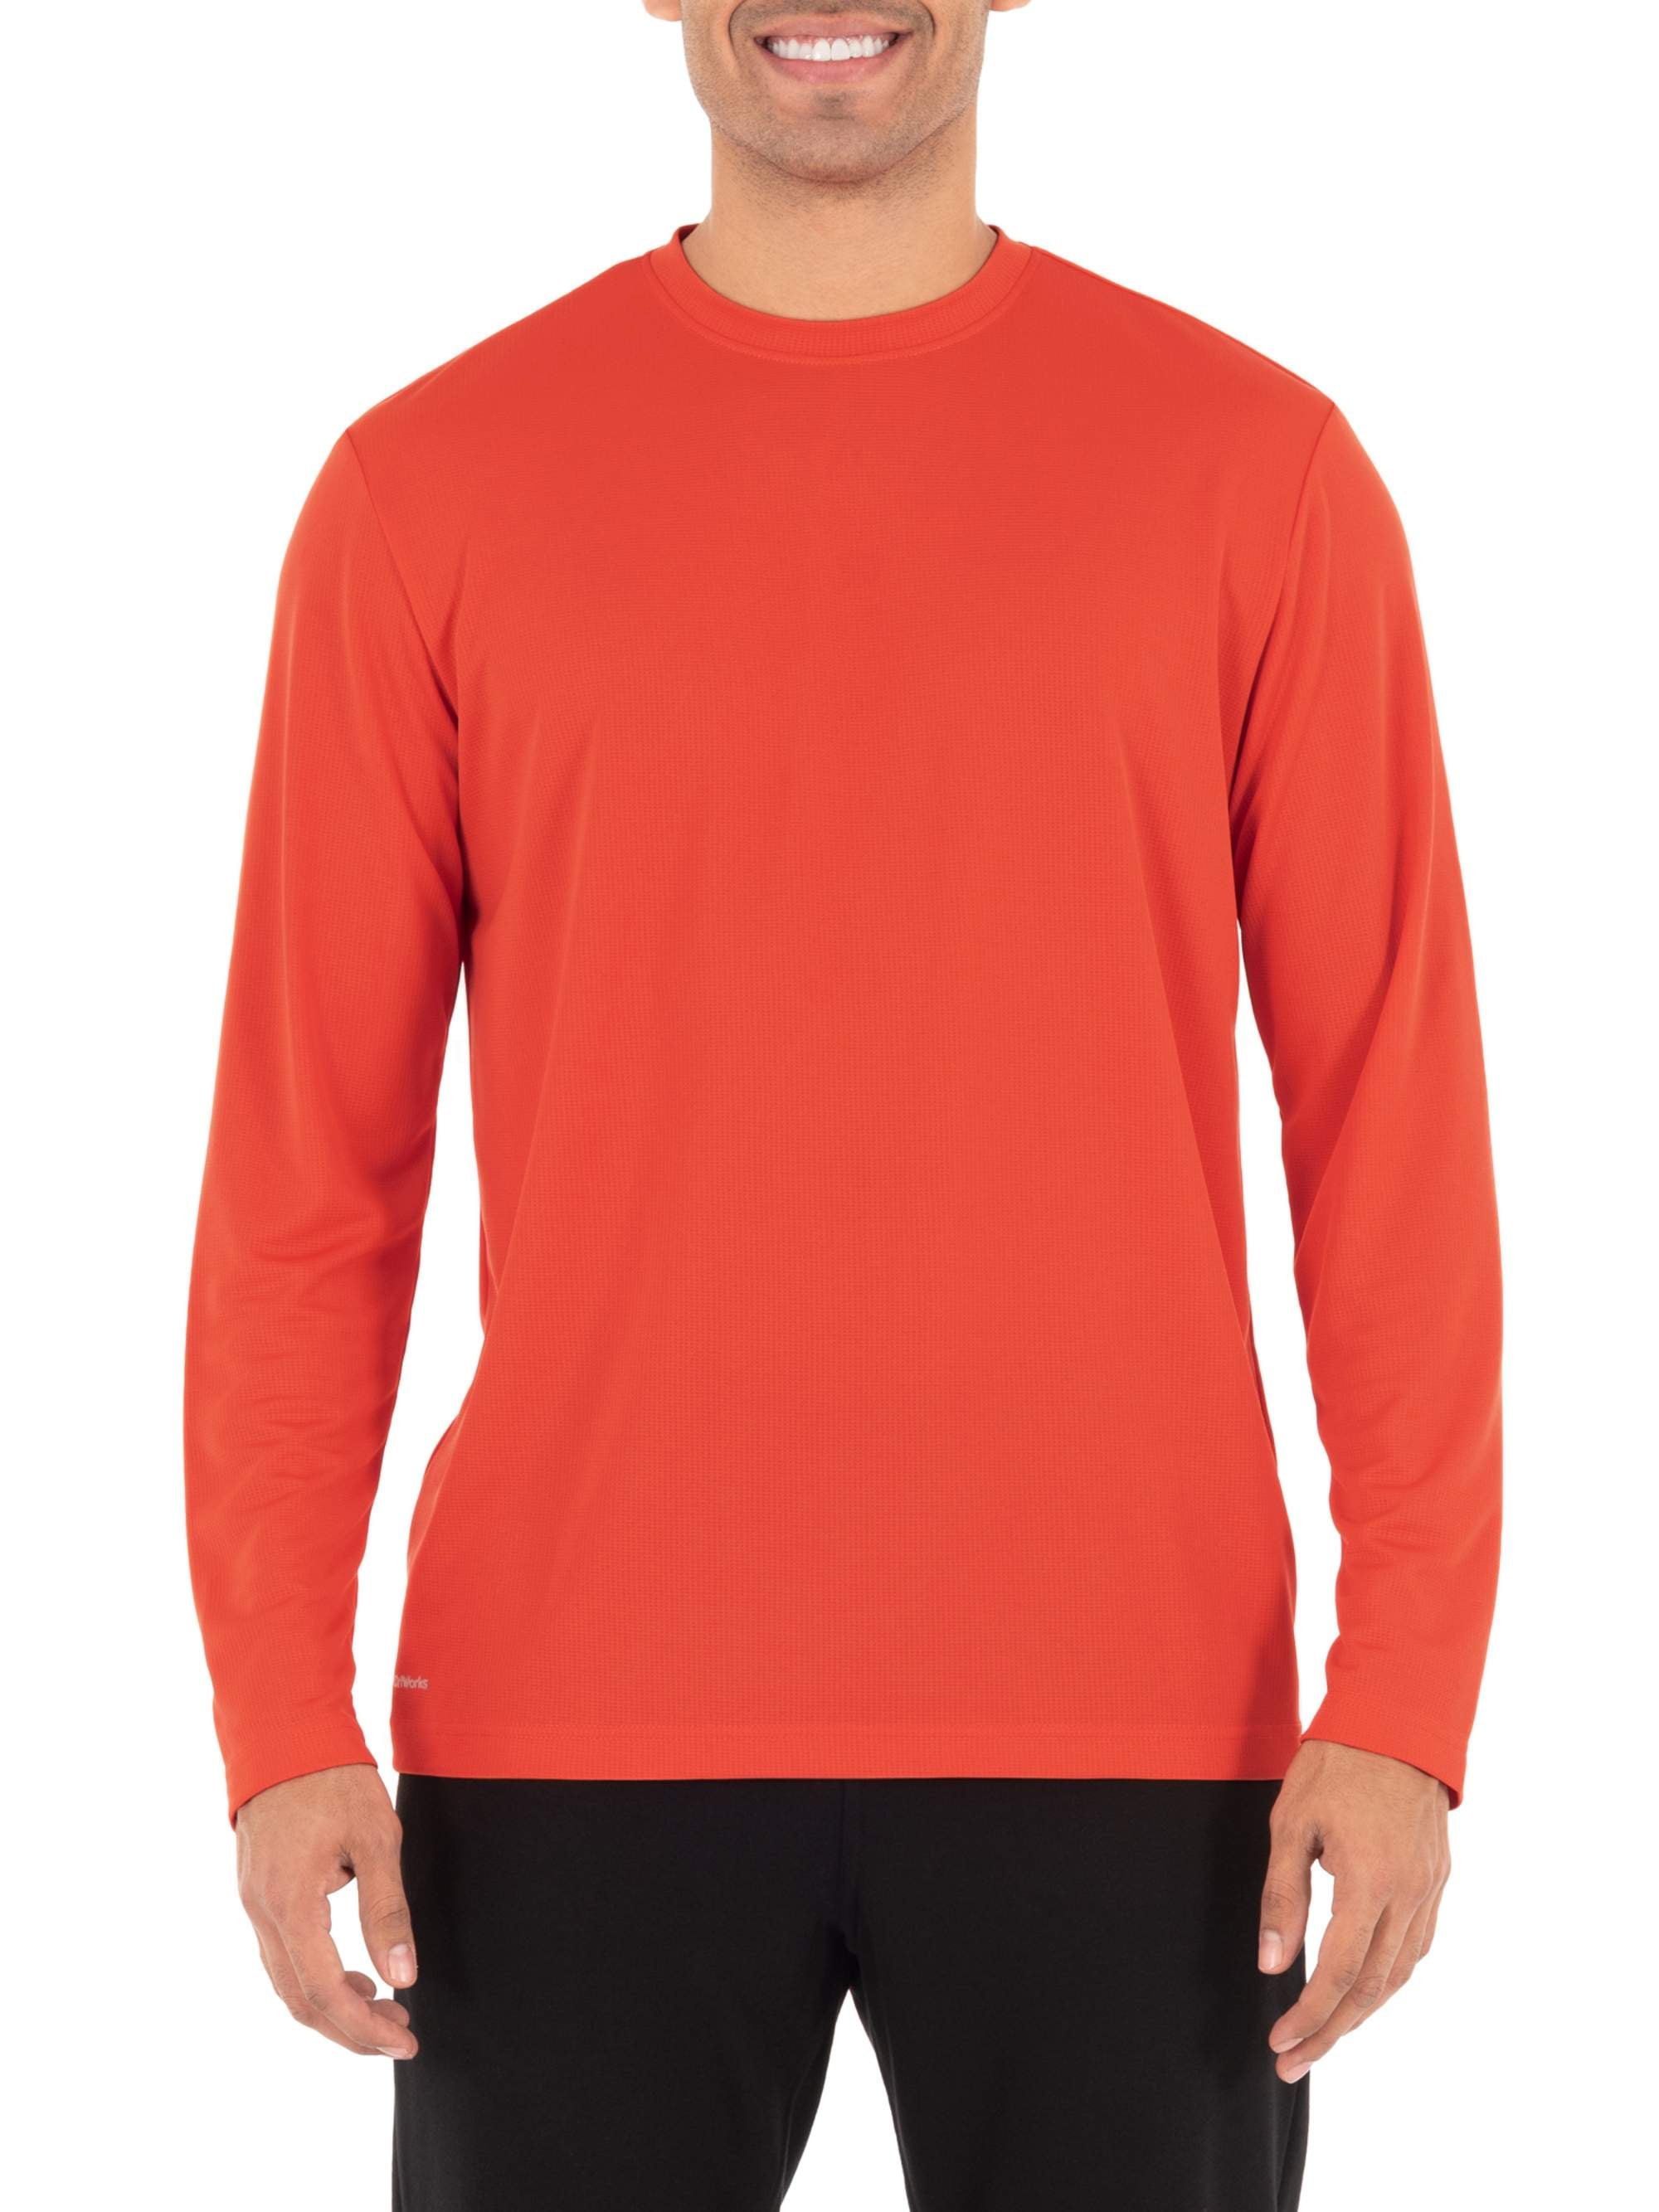 athletic works men's shirts